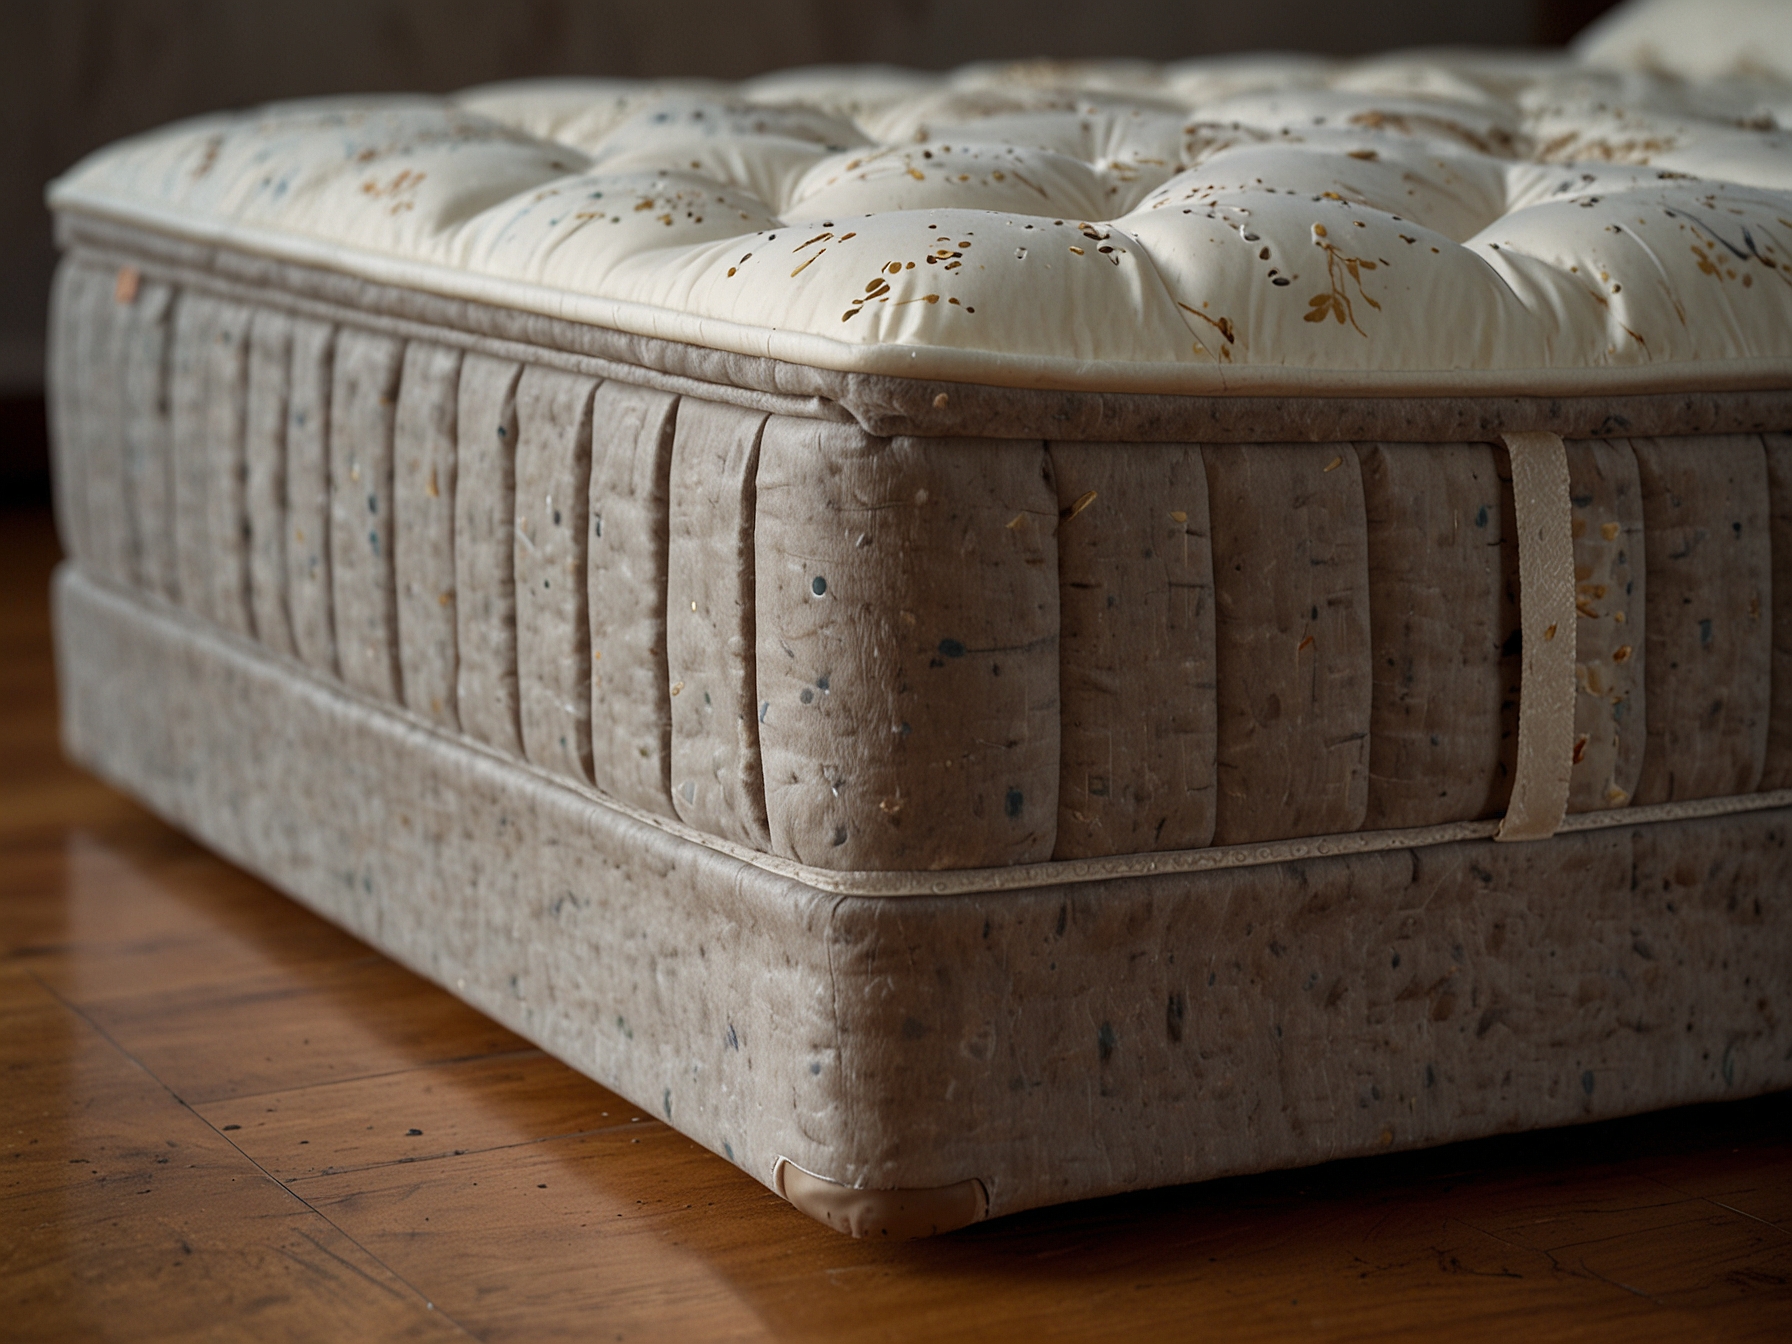 The Naturepedic Concerto Pillow Top mattress is shown with its multiple layers, including an organic cotton cover, wool batting, latex layer, and high-density coil system.